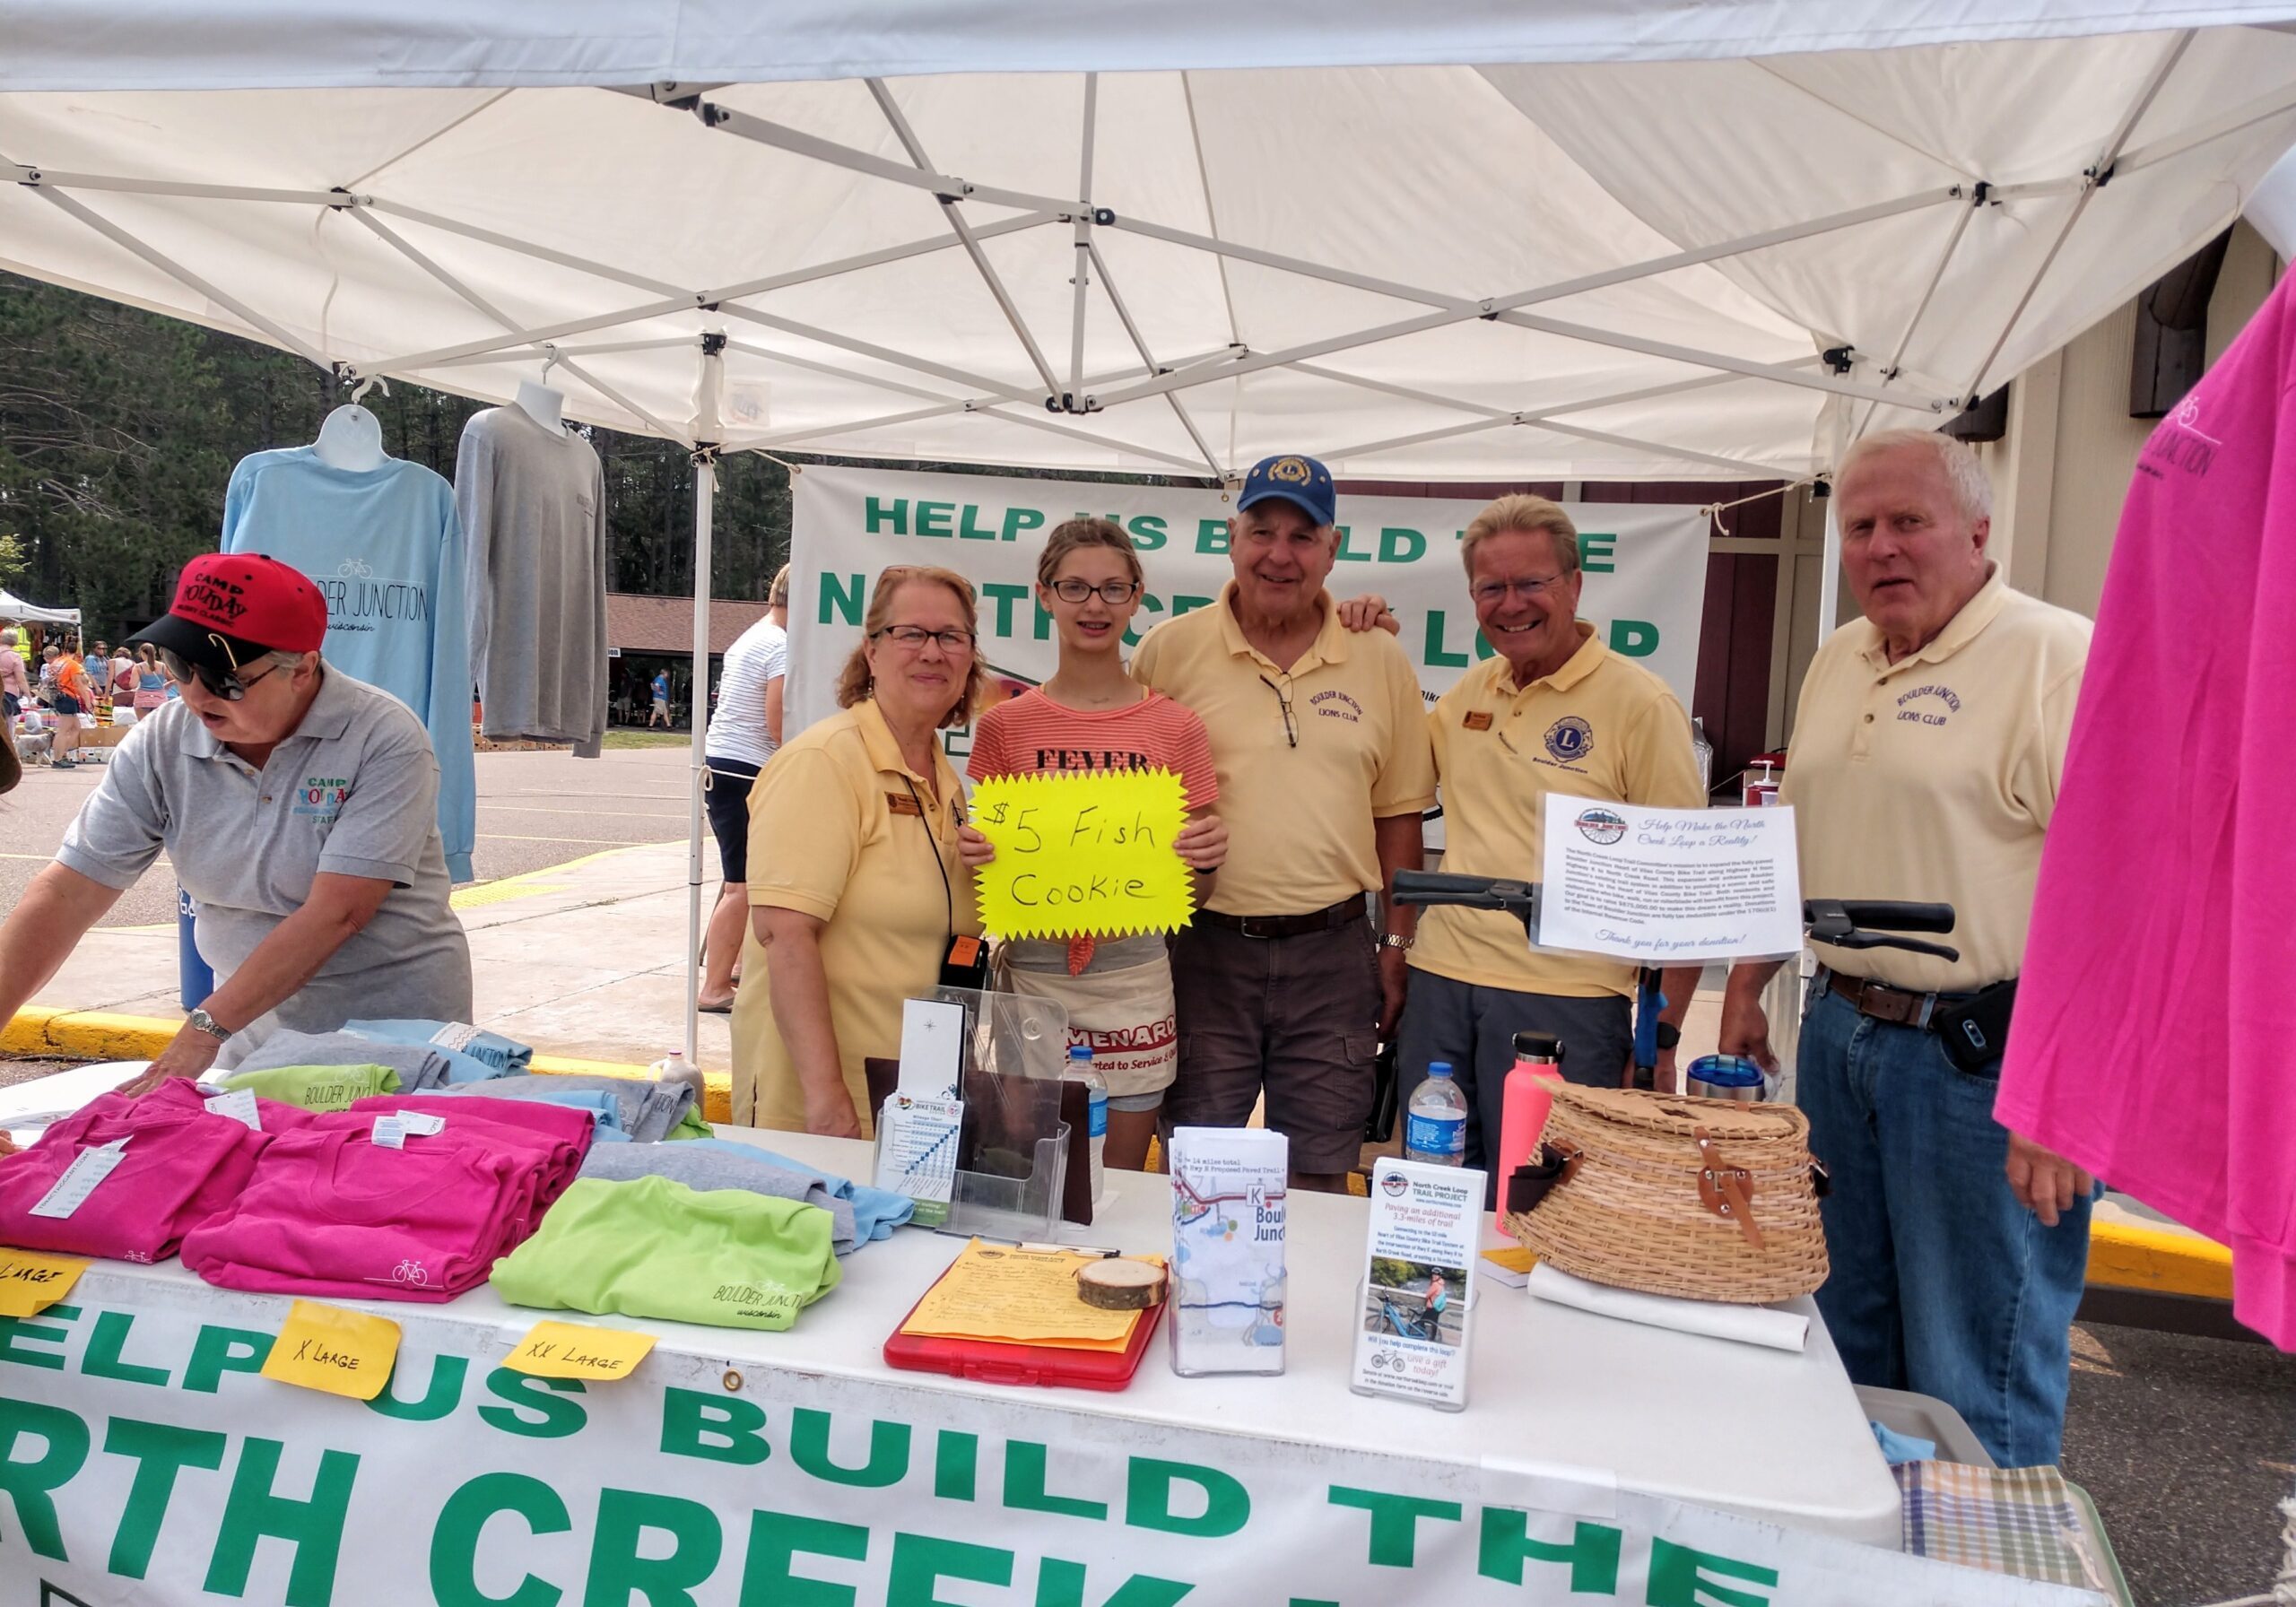 NCL Committee fundraising at the Lions Club Flea Market Summer 2021